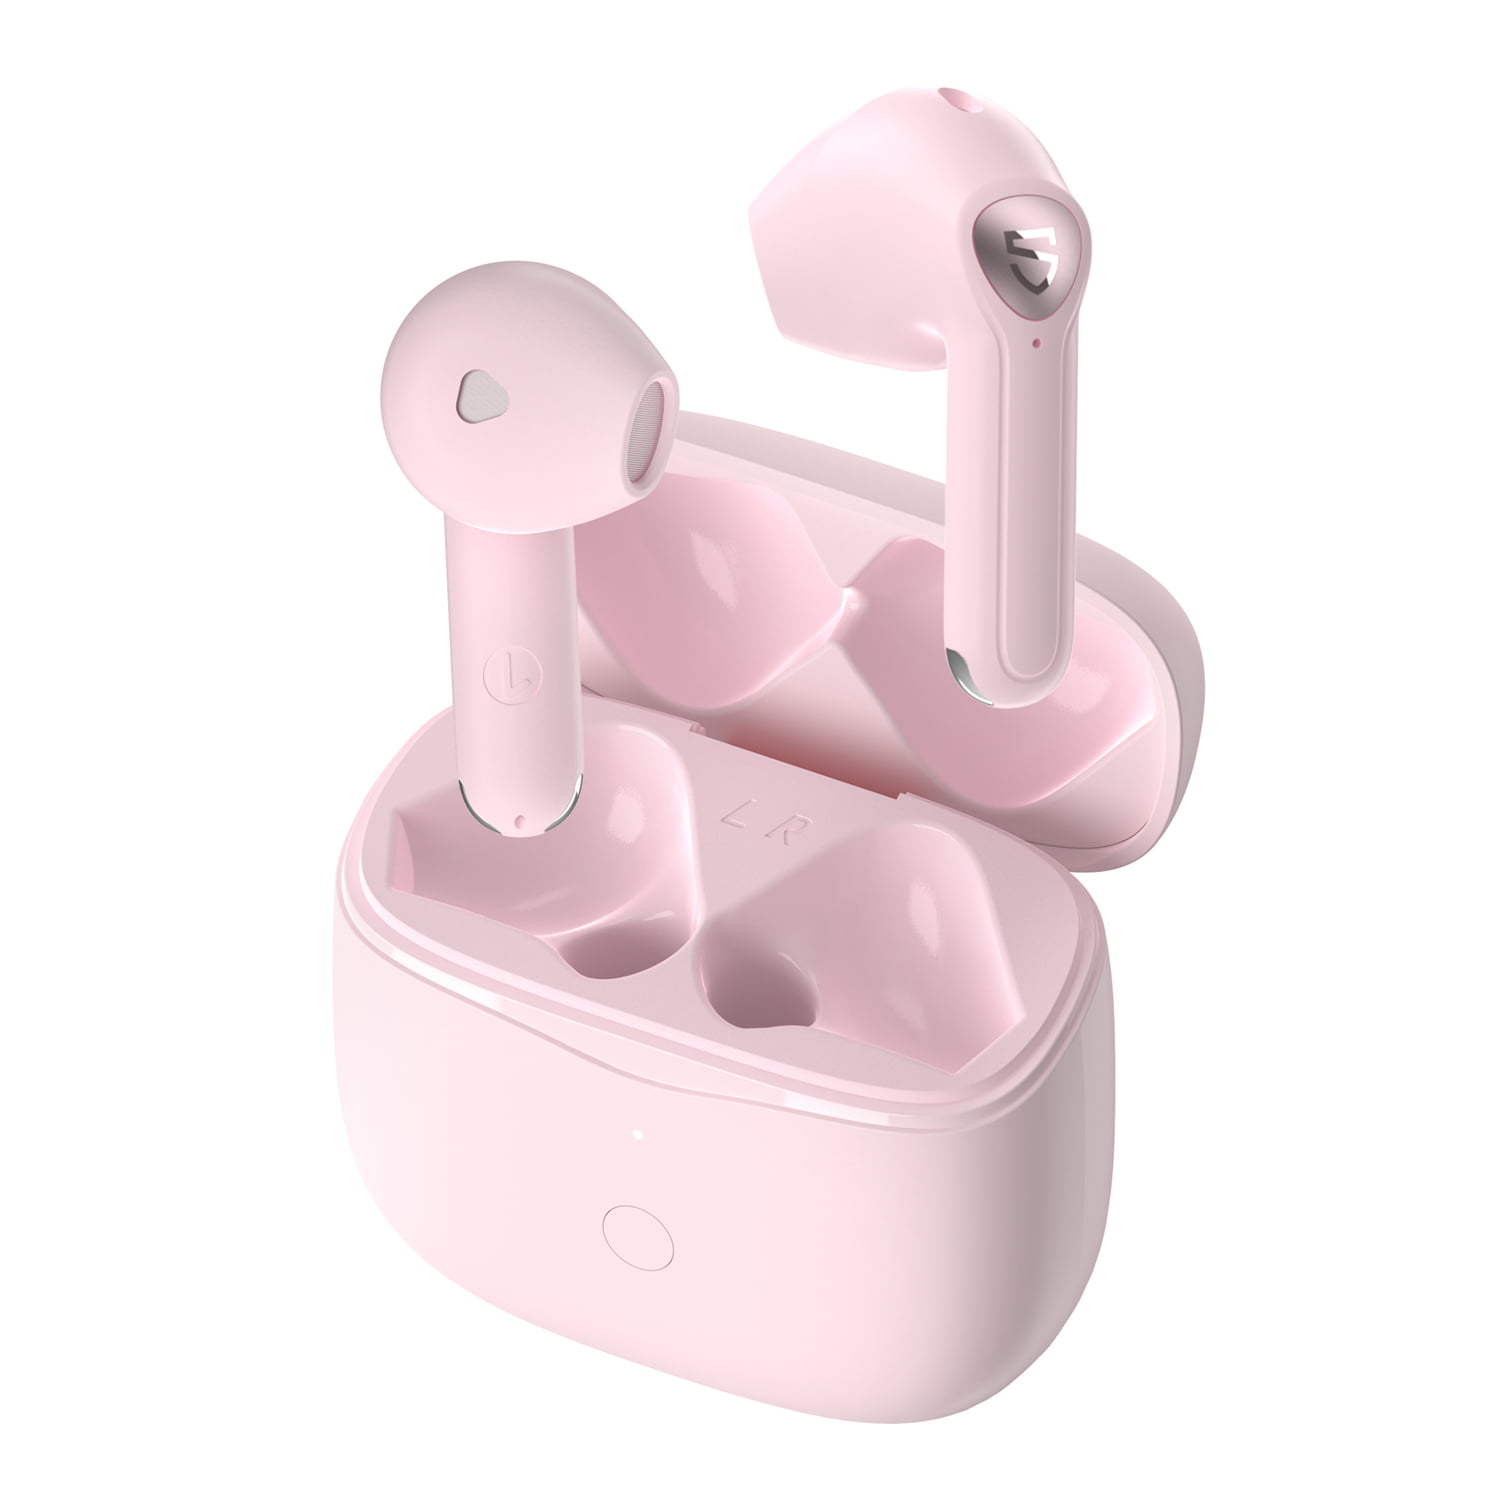 No AirPods 3 yet? Nab these new SoundPeats buds for $37.49 instead - CNET